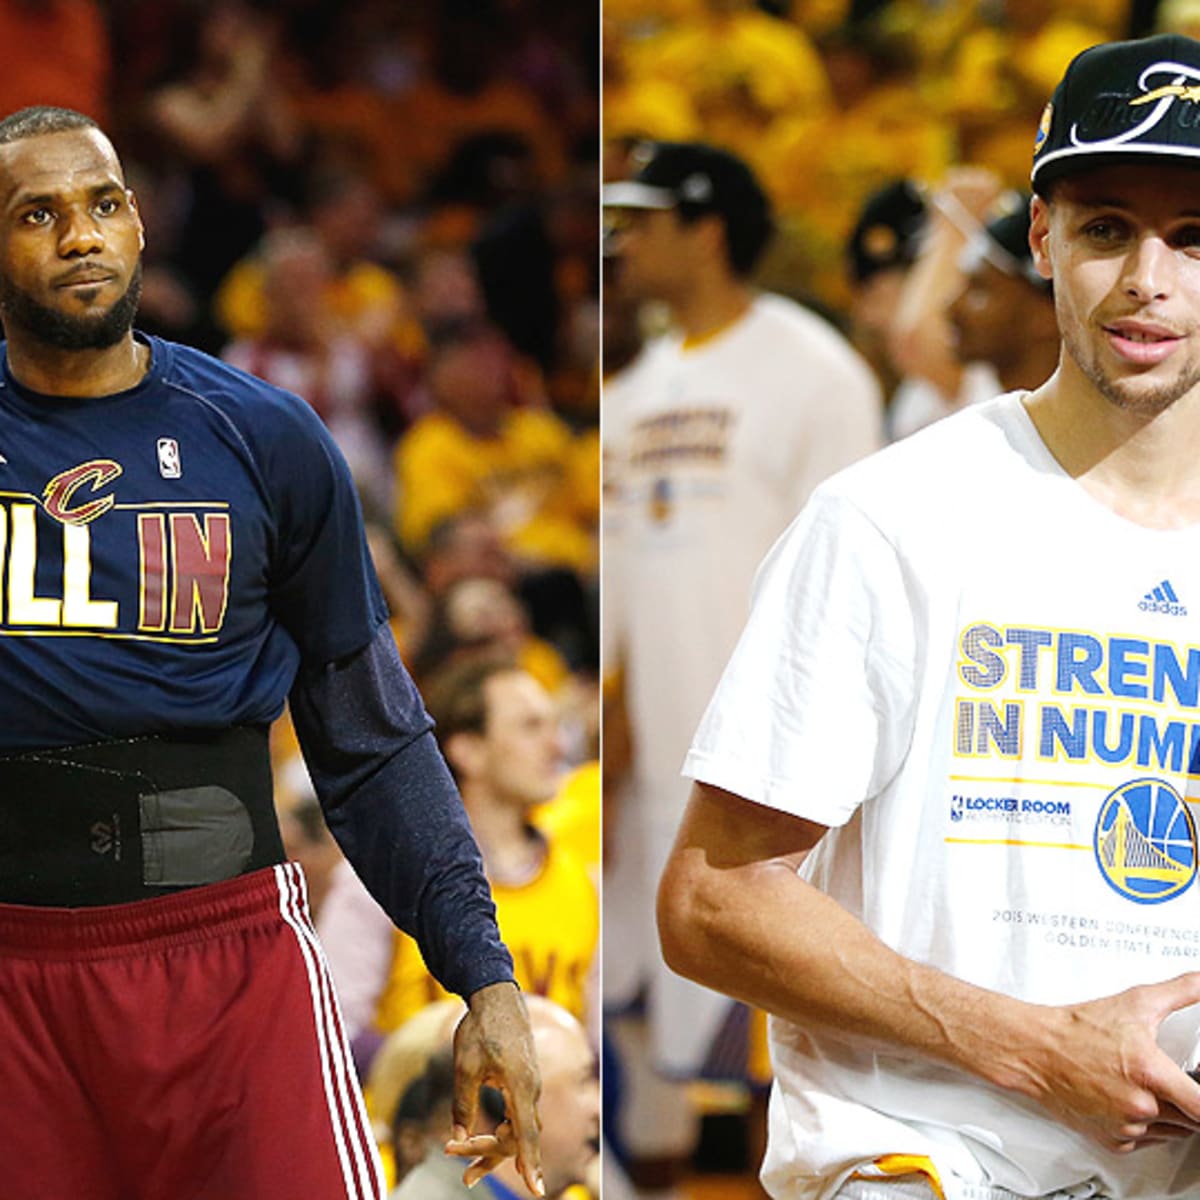 Stephen Curry annoyed at Matthew Dellavedova hype during NBA Finals